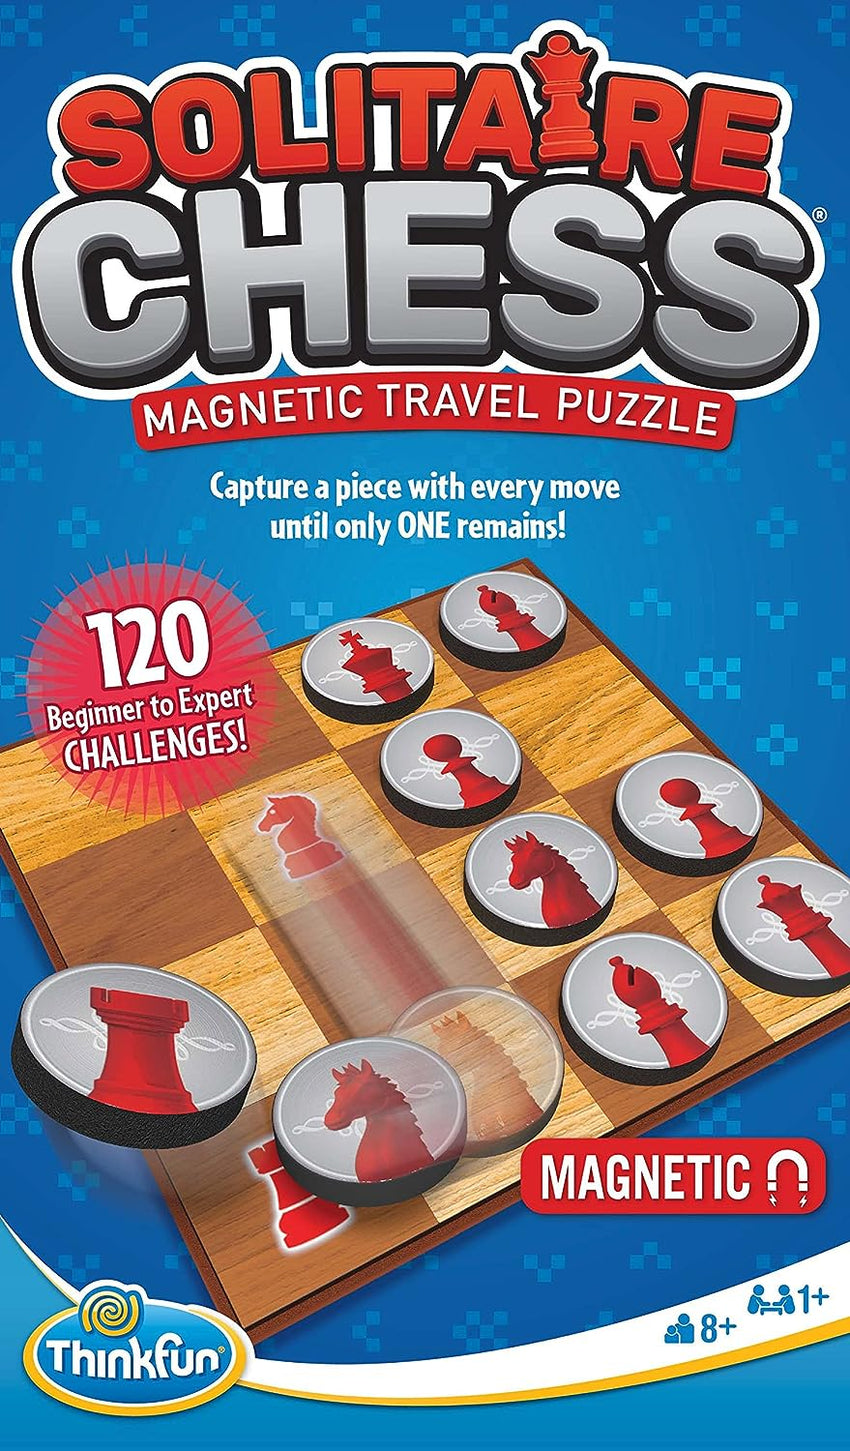 Solitaire Chess Magnetic Travel Game